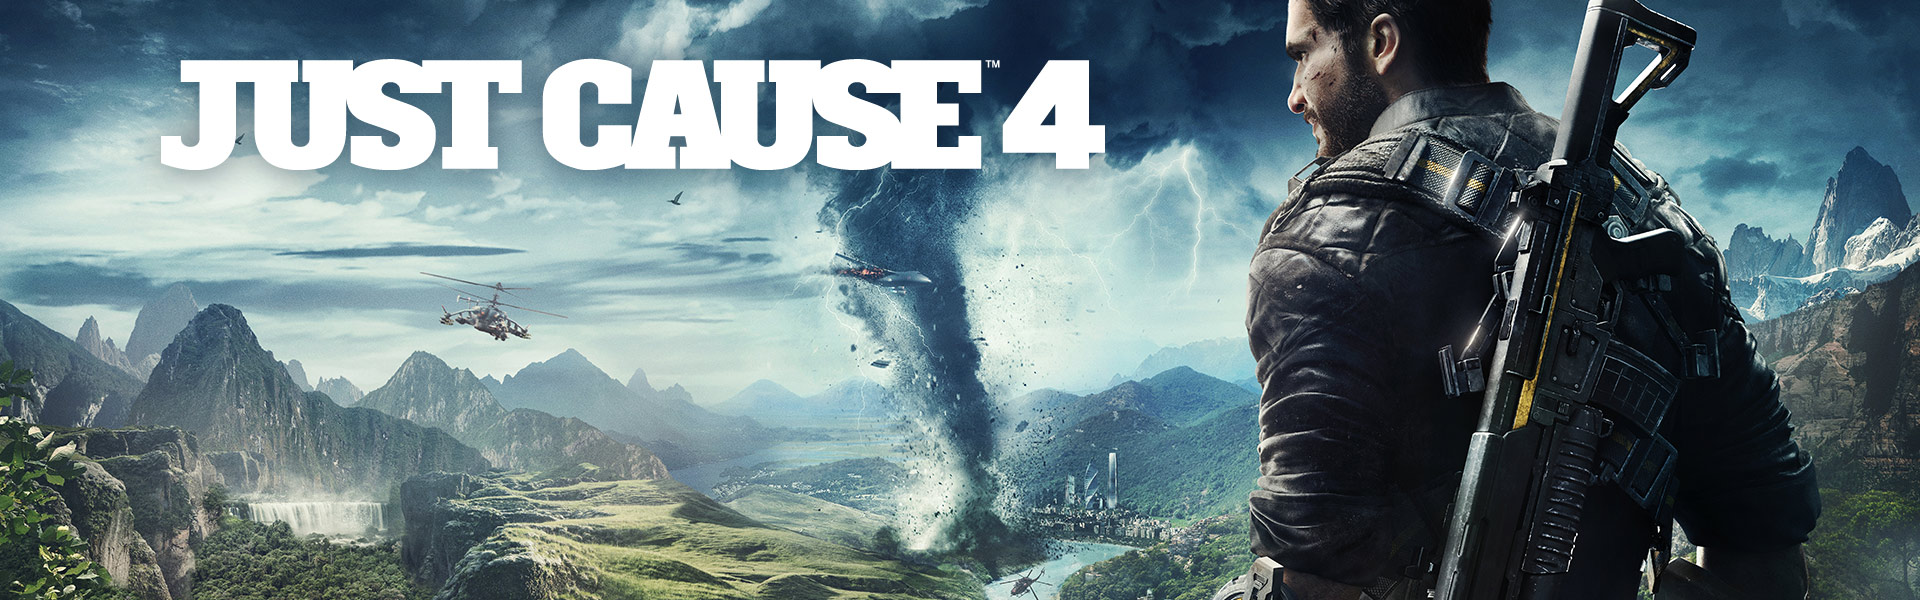 just cause 4 xbox one